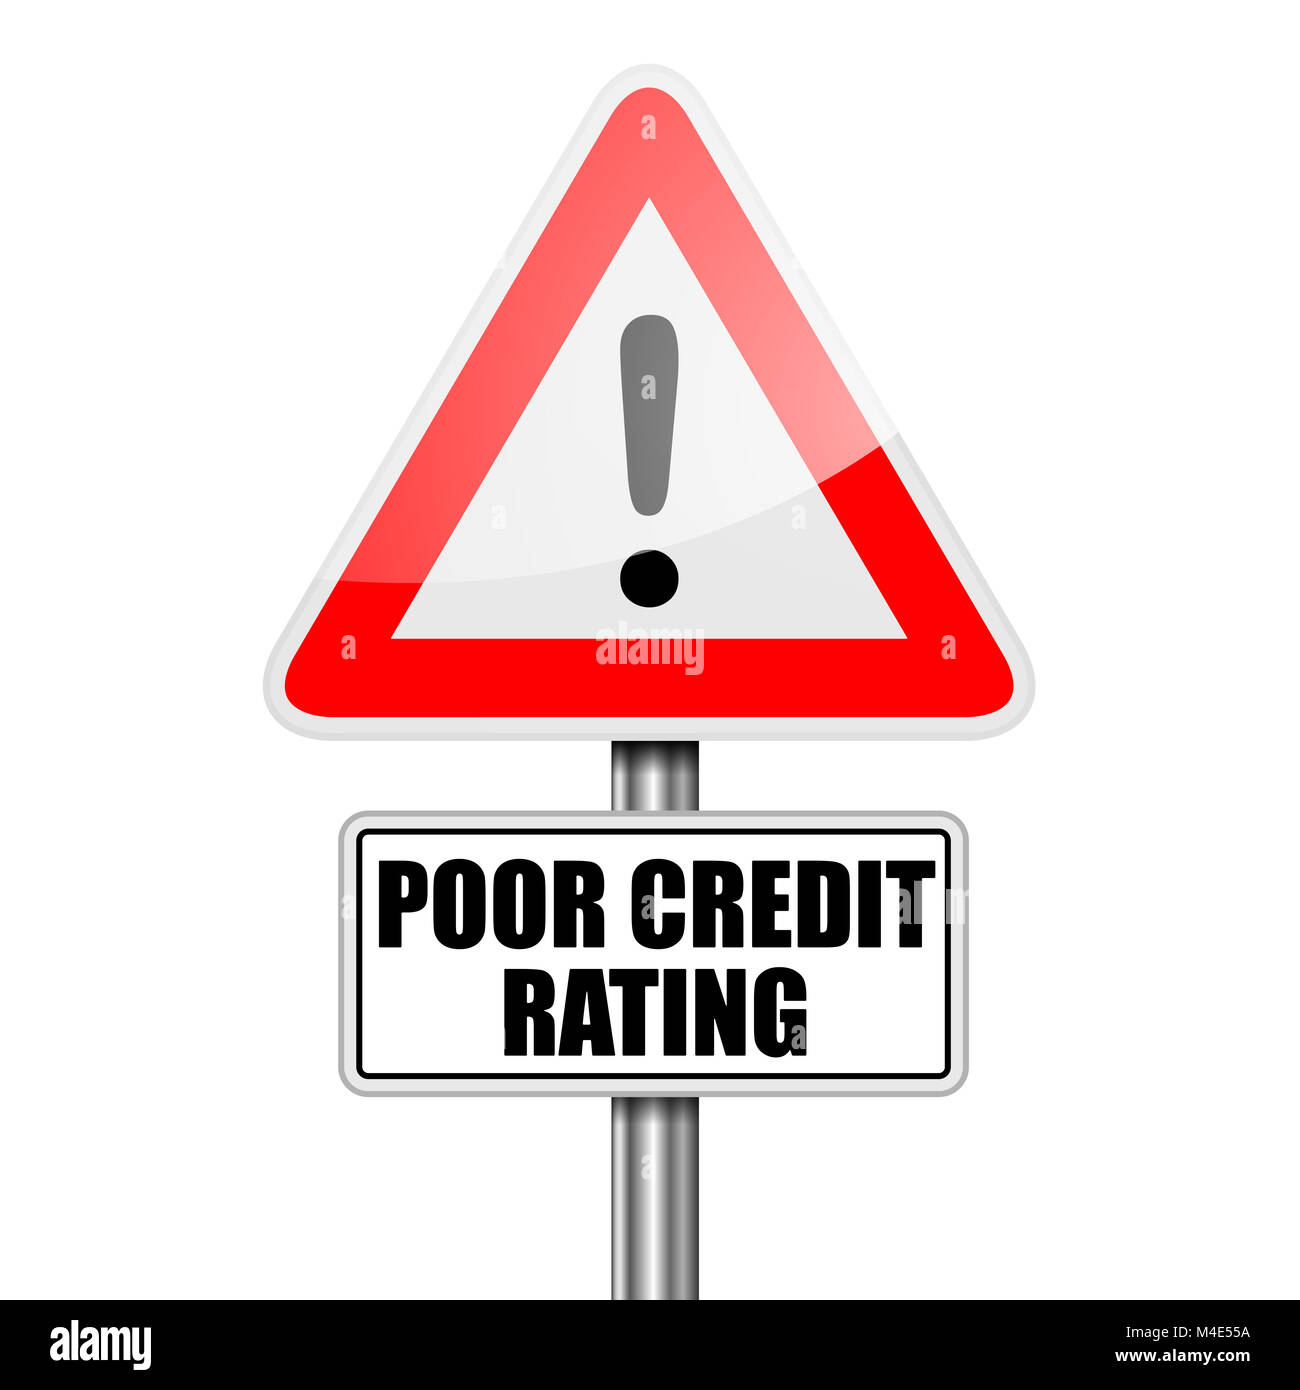 Poor Credit Rating Stock Photo